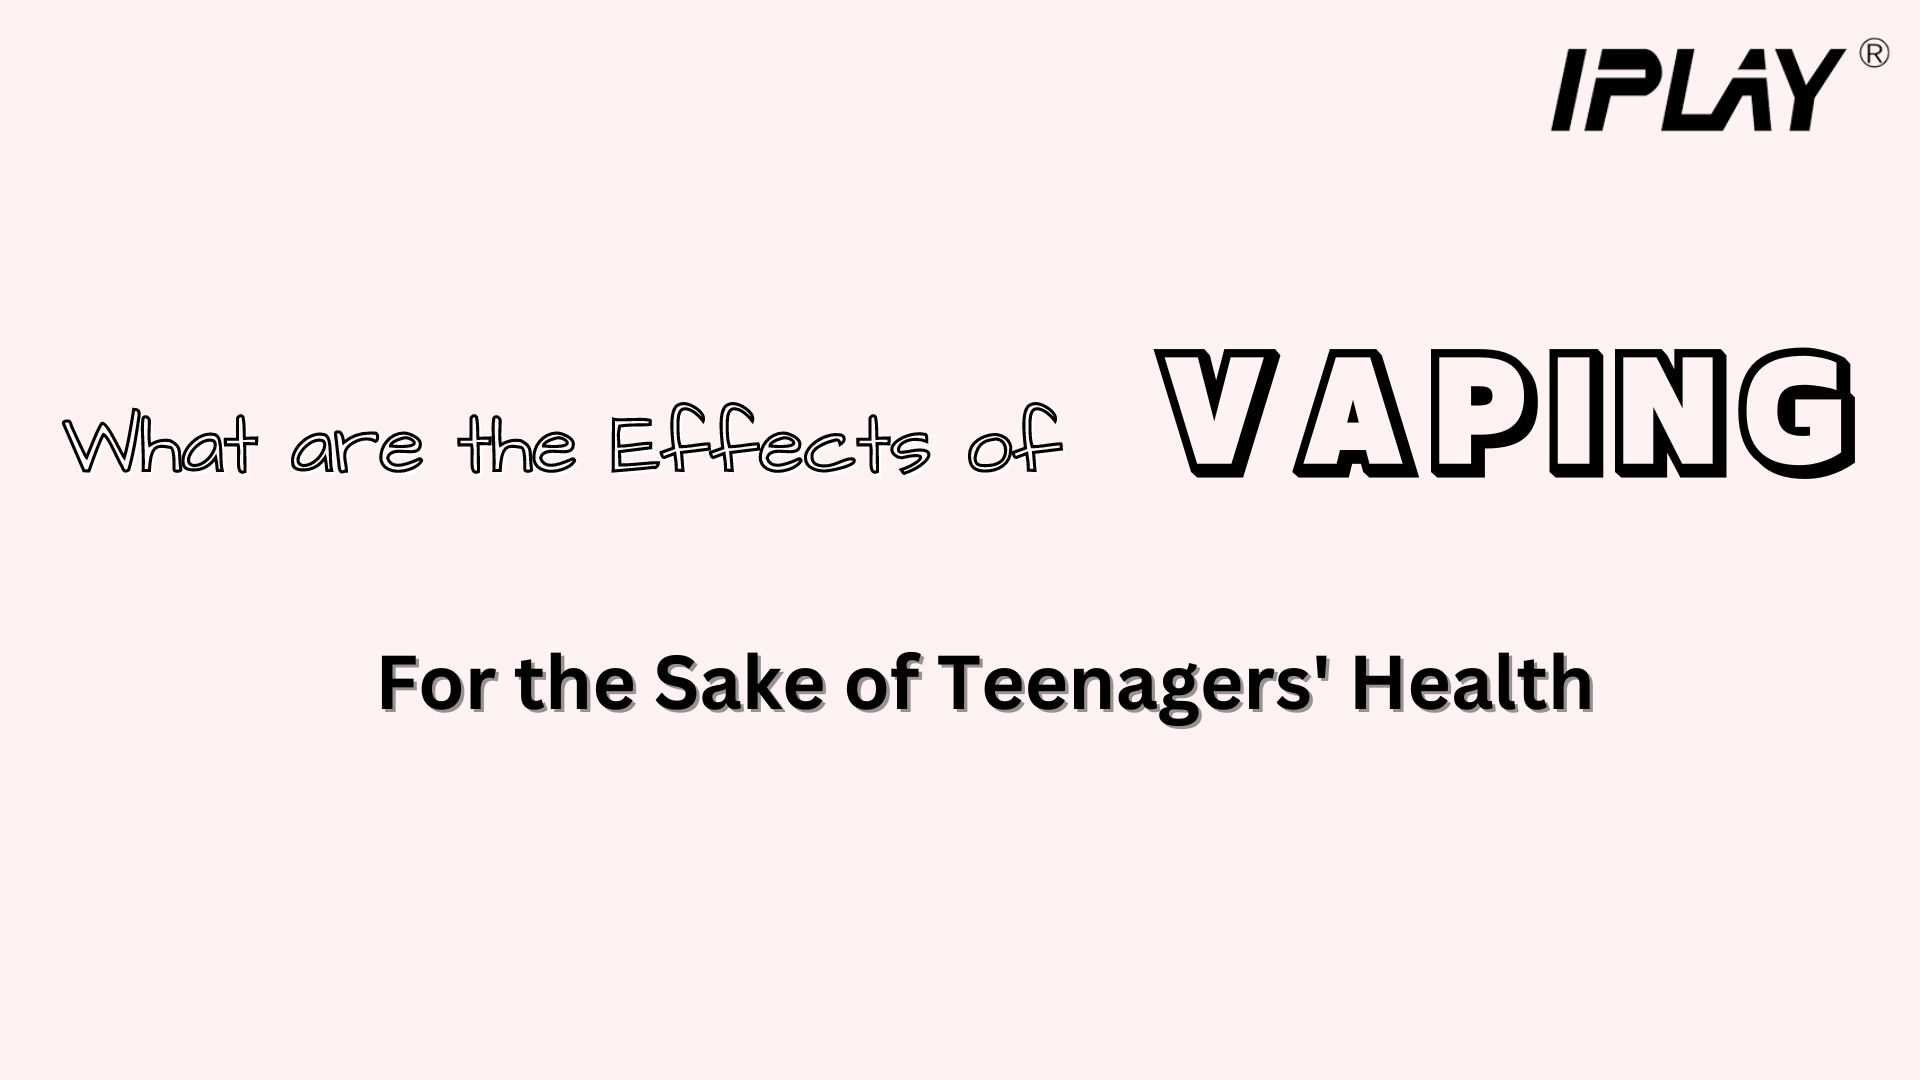 What are the Health Effects of Vaping for Teenagers?